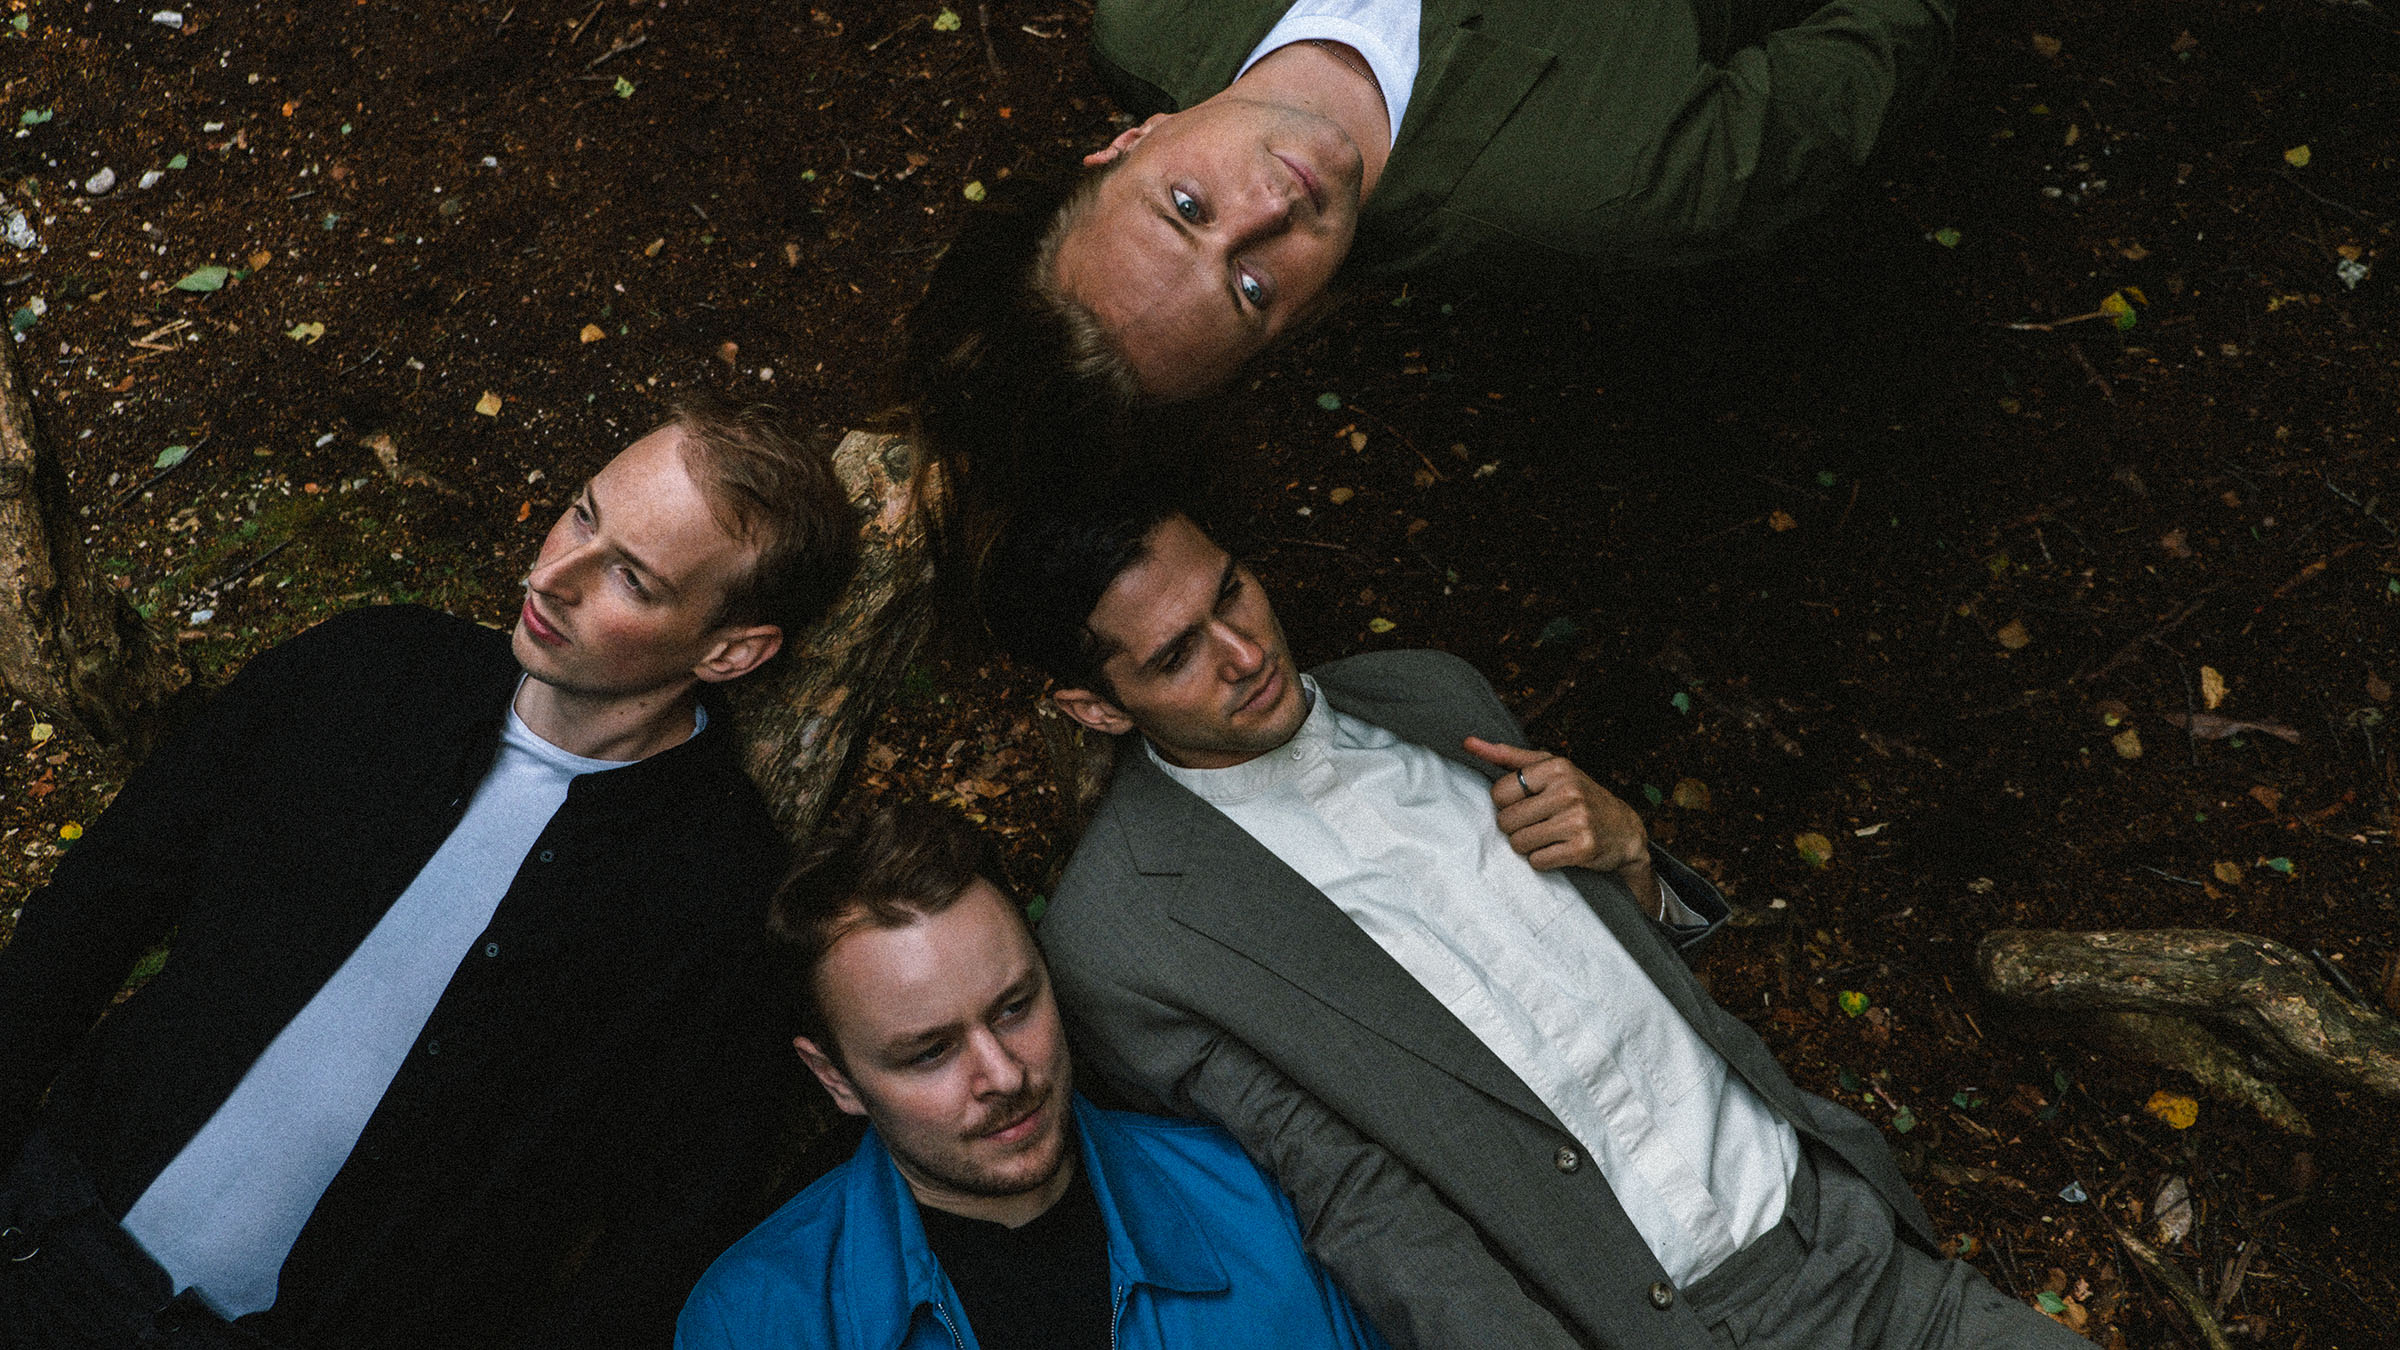 LOW ISLAND announce debut album 'If You Could Have It All Again' - out 16th April 